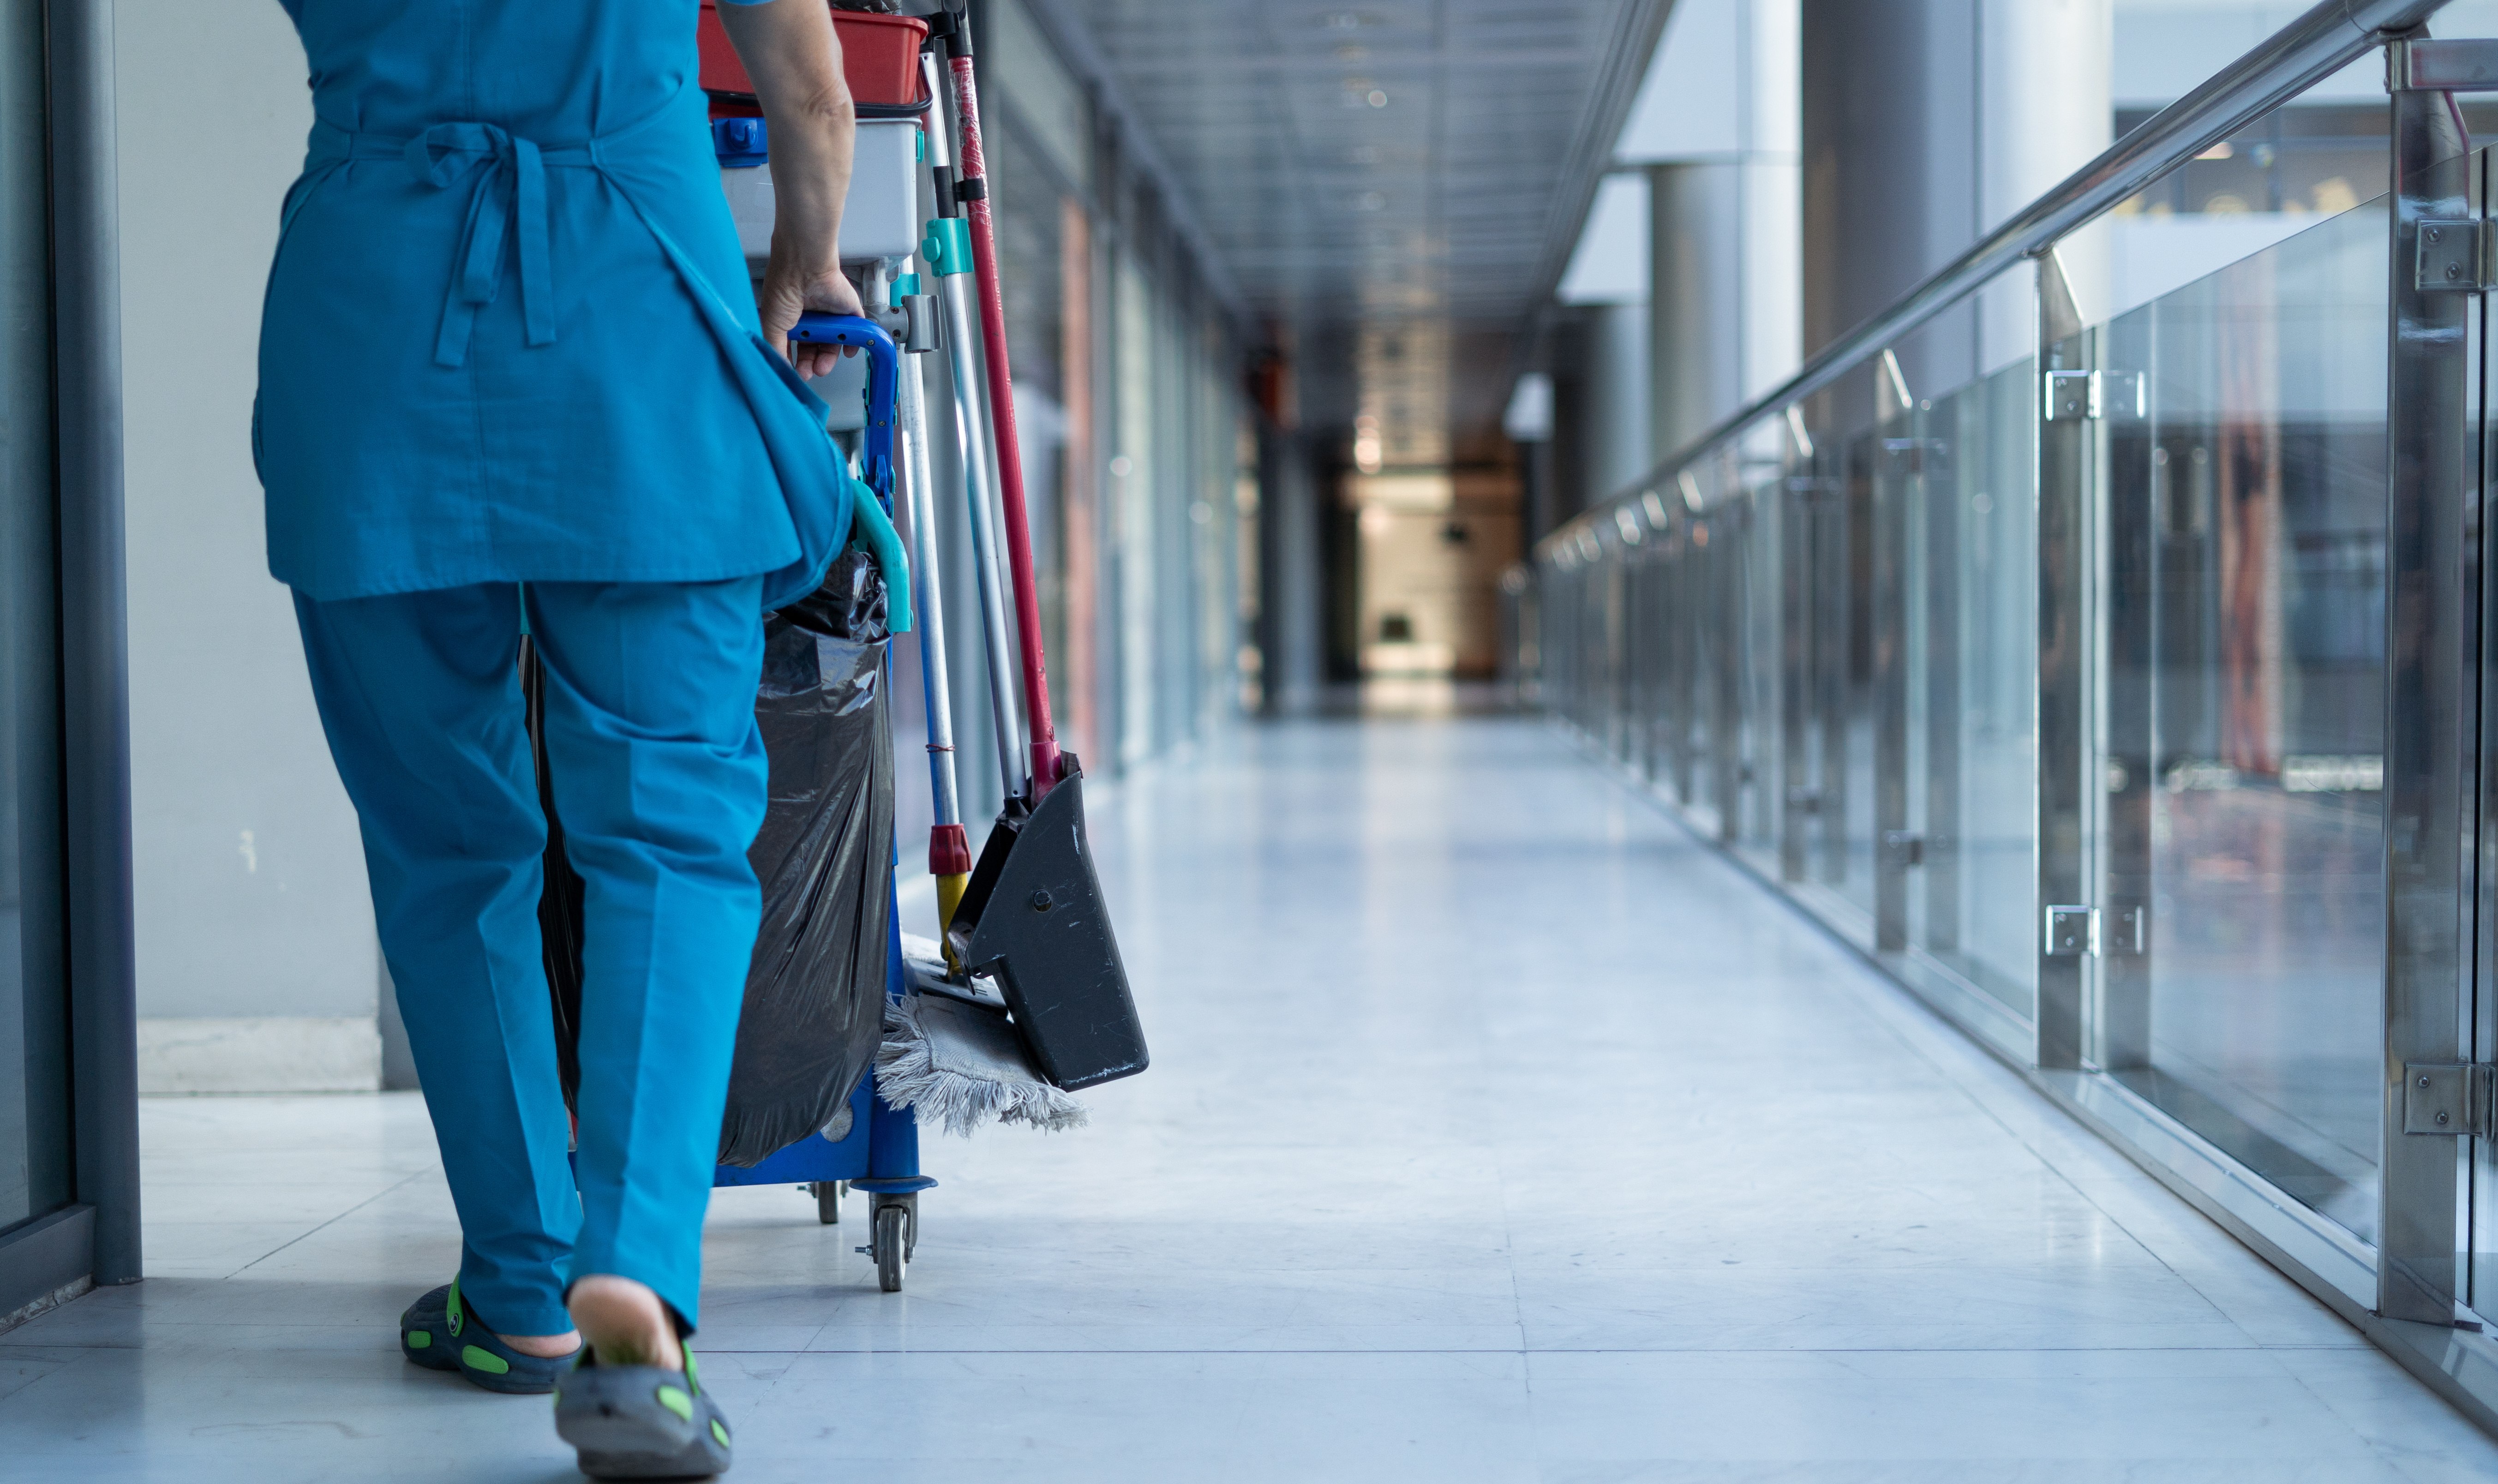 cleaning staff in blue uniform pushing cleaning cart down hallway in a sterile looking environment